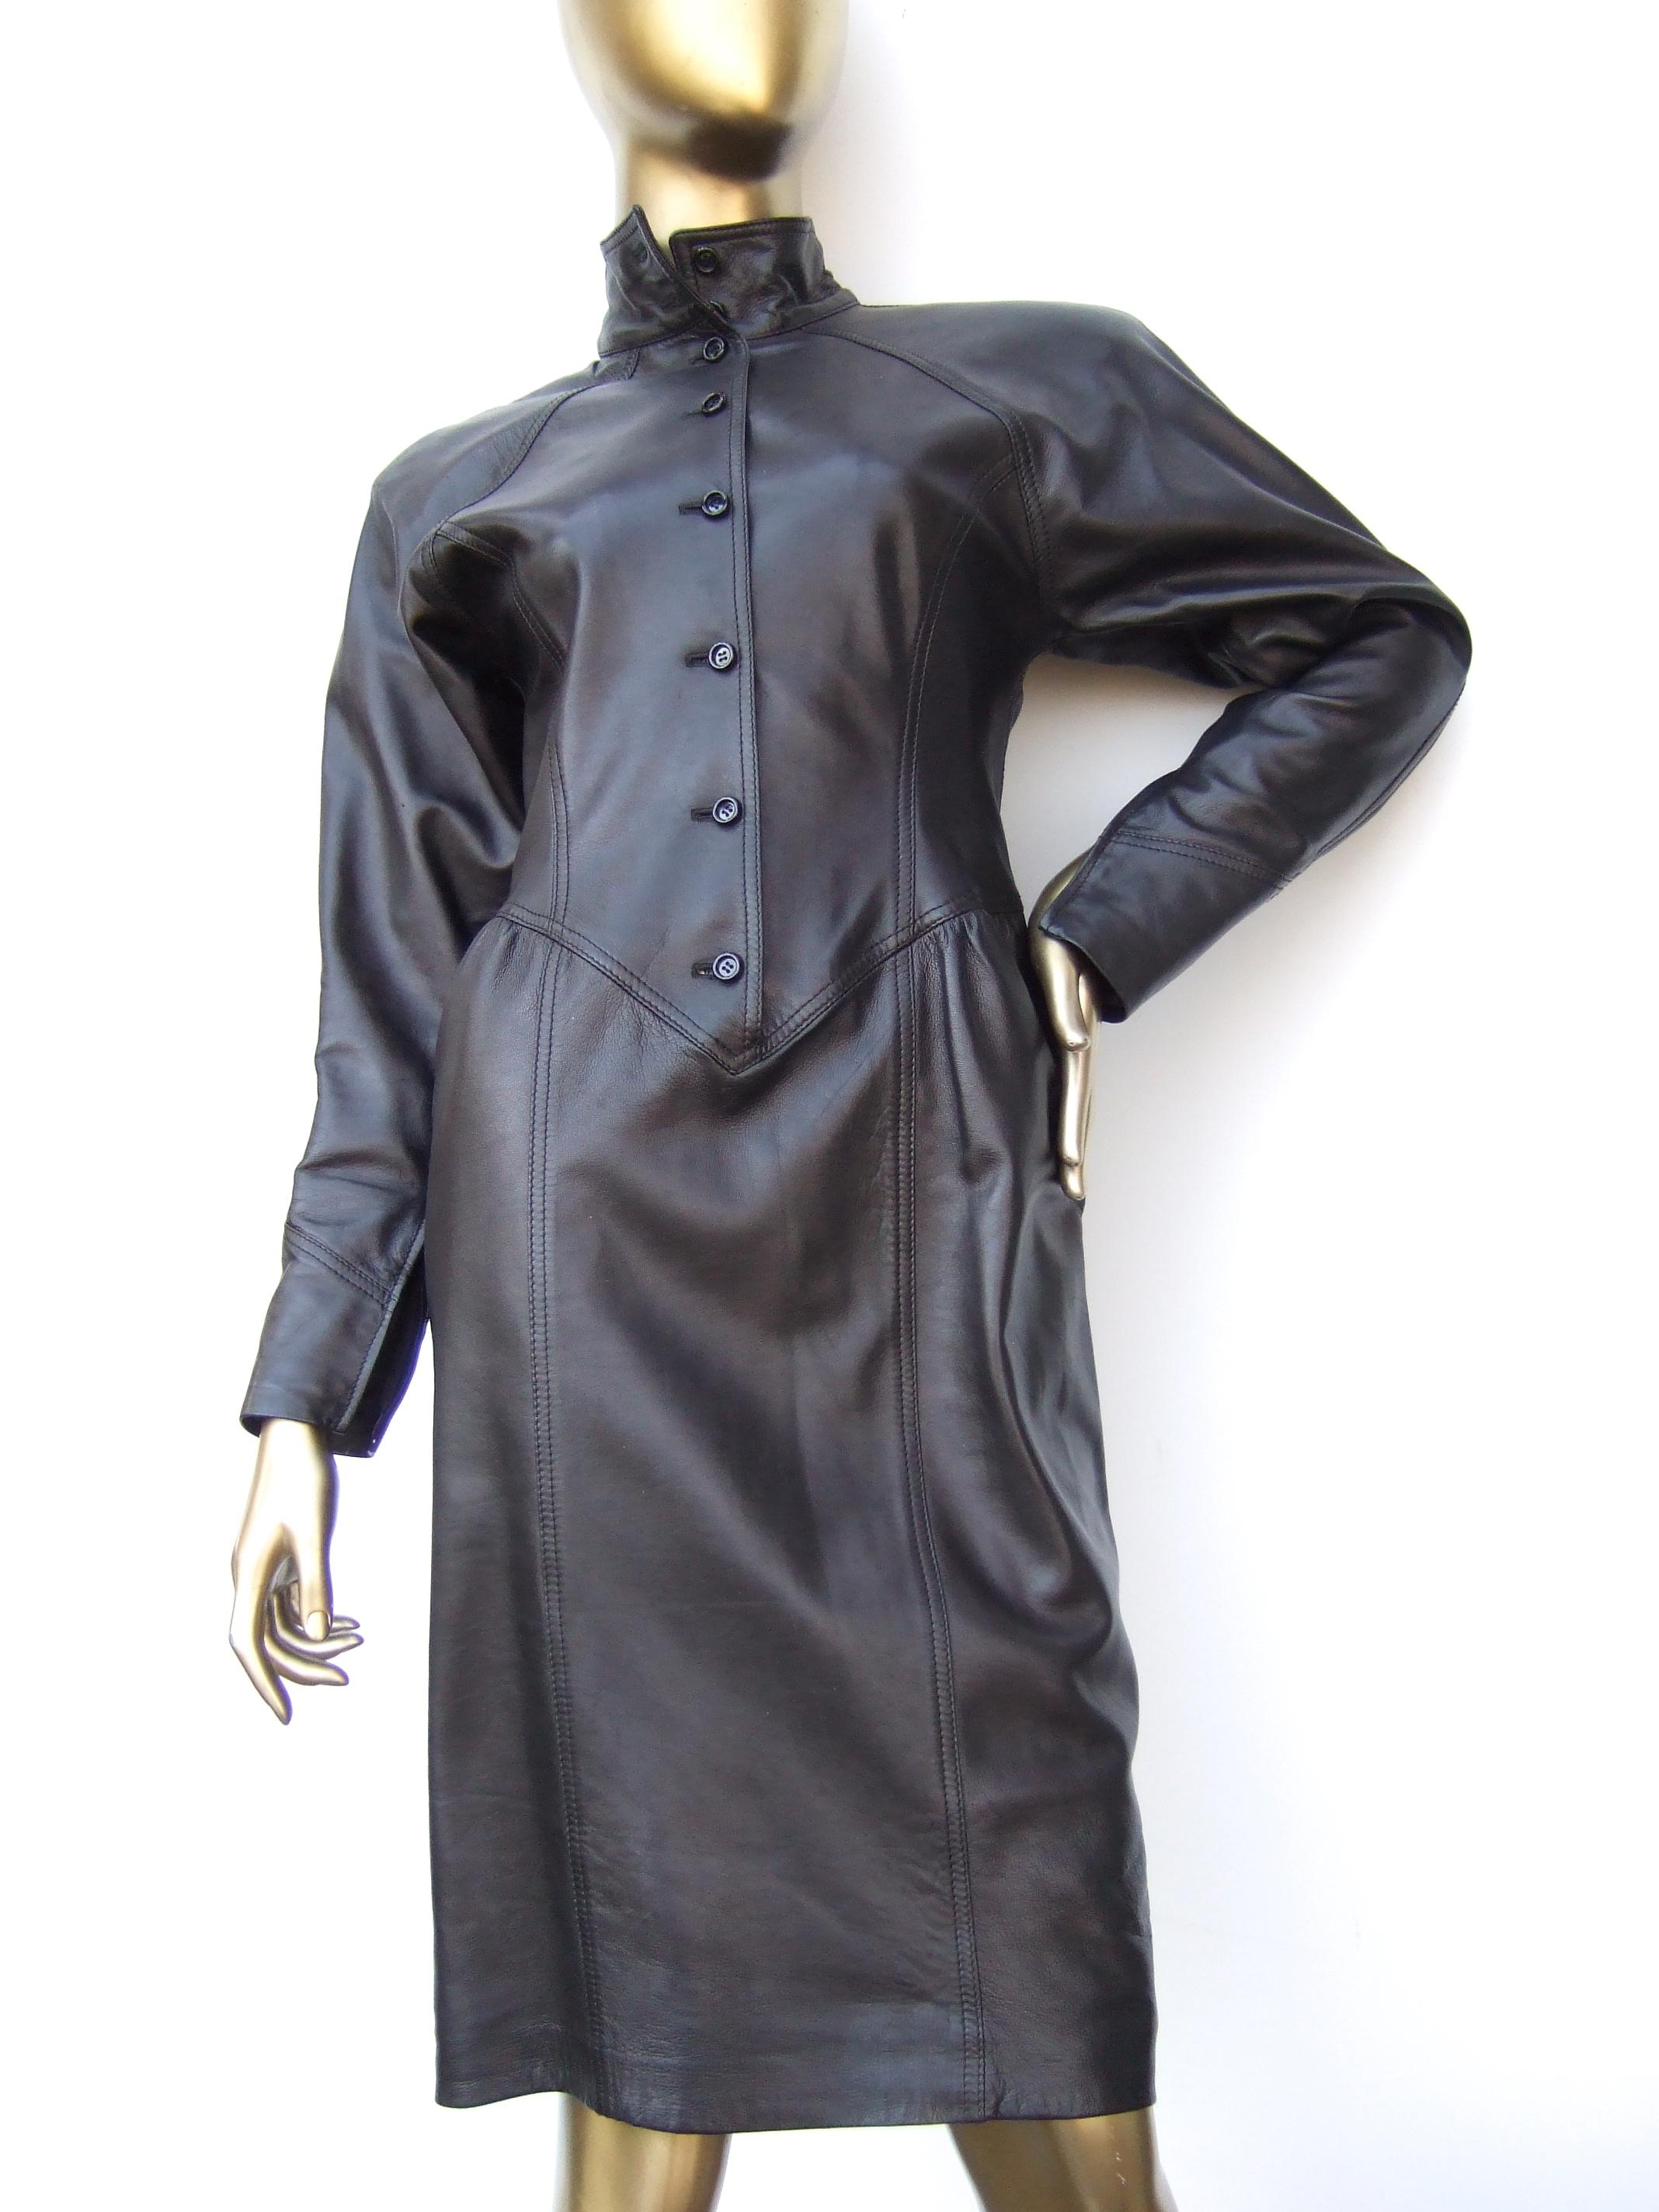 Emanuel Ungaro Paris Avant-garde Edgy Brown Leather Dress Made in Italy c 1980s For Sale 9